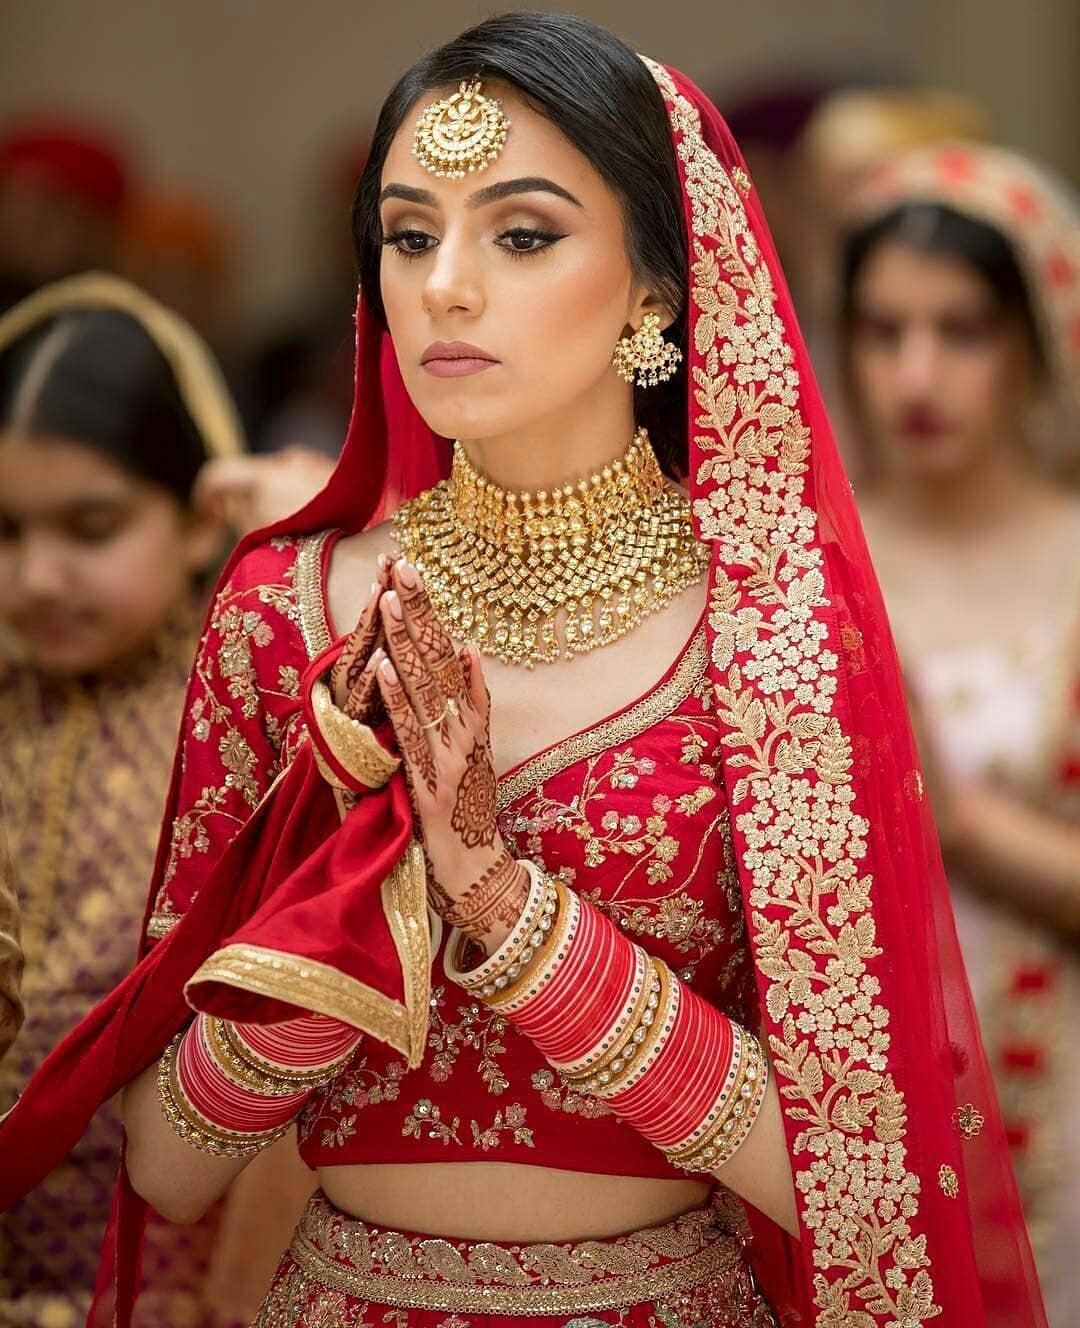 10 Gold Necklace Set Options For The Most Stunning Bridal Look